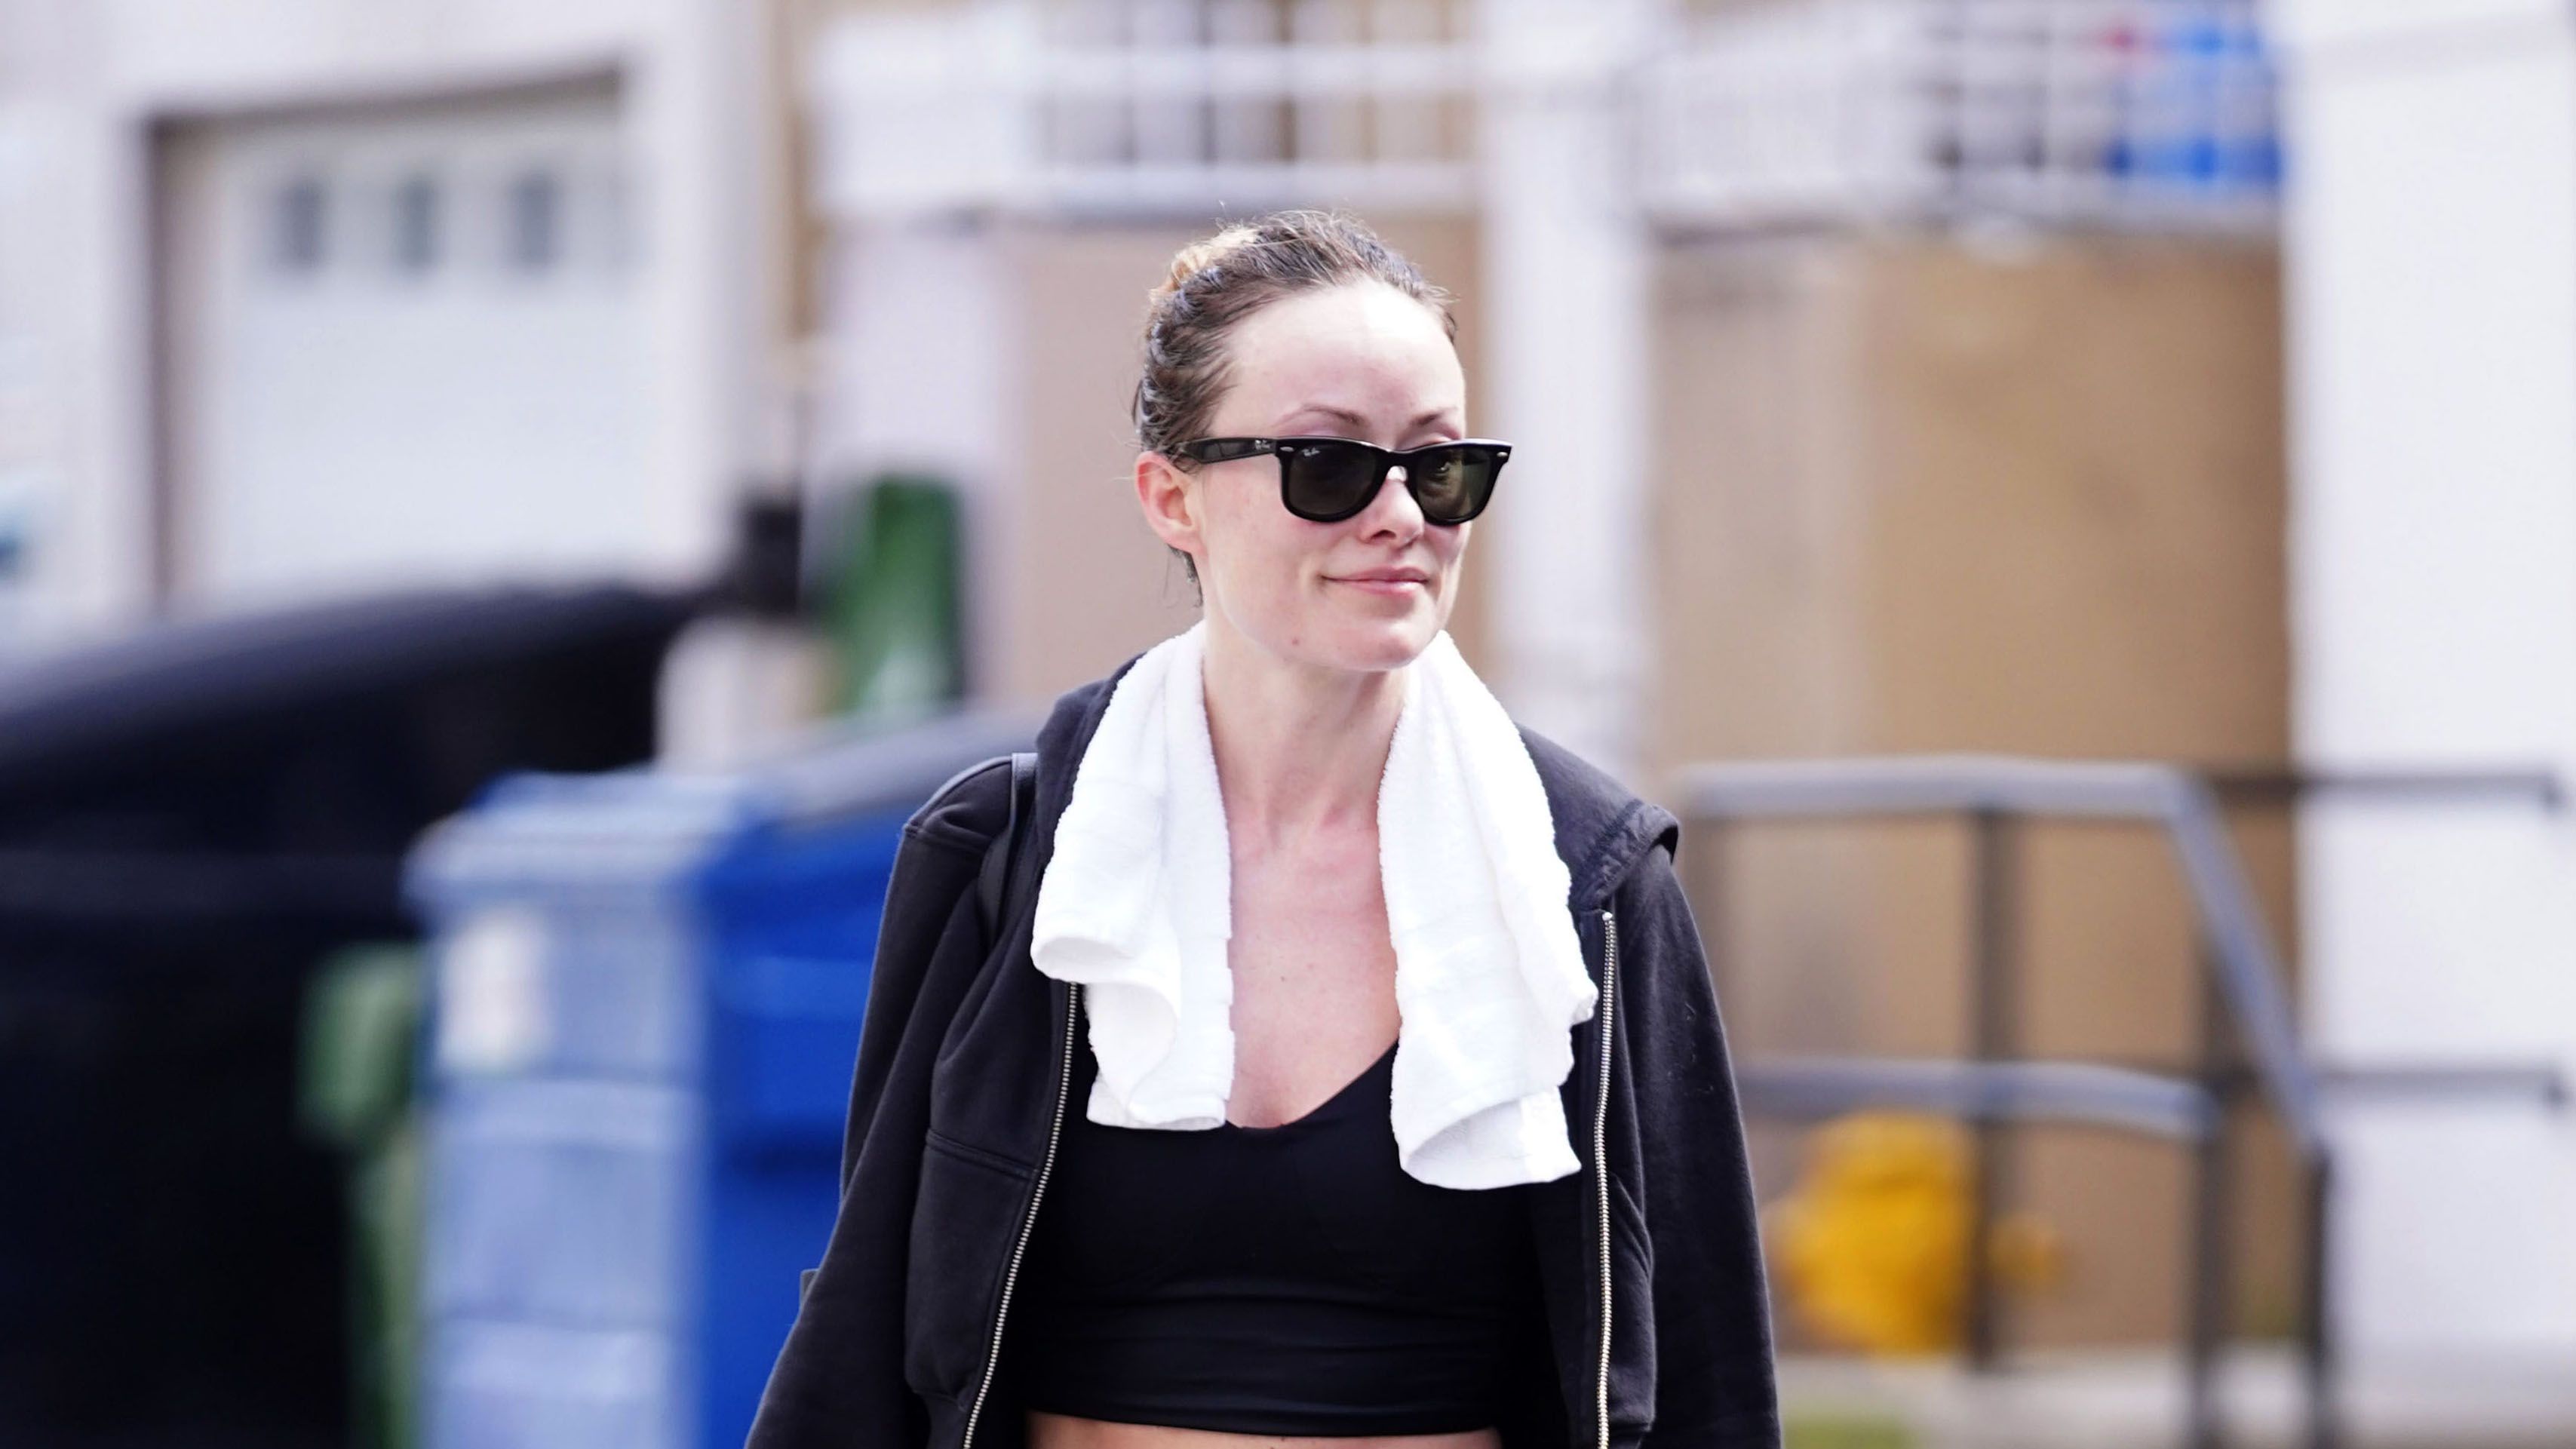 Olivia Wilde is seen arriving to the gym in LA for her daily workout.  Featuring: Olivia